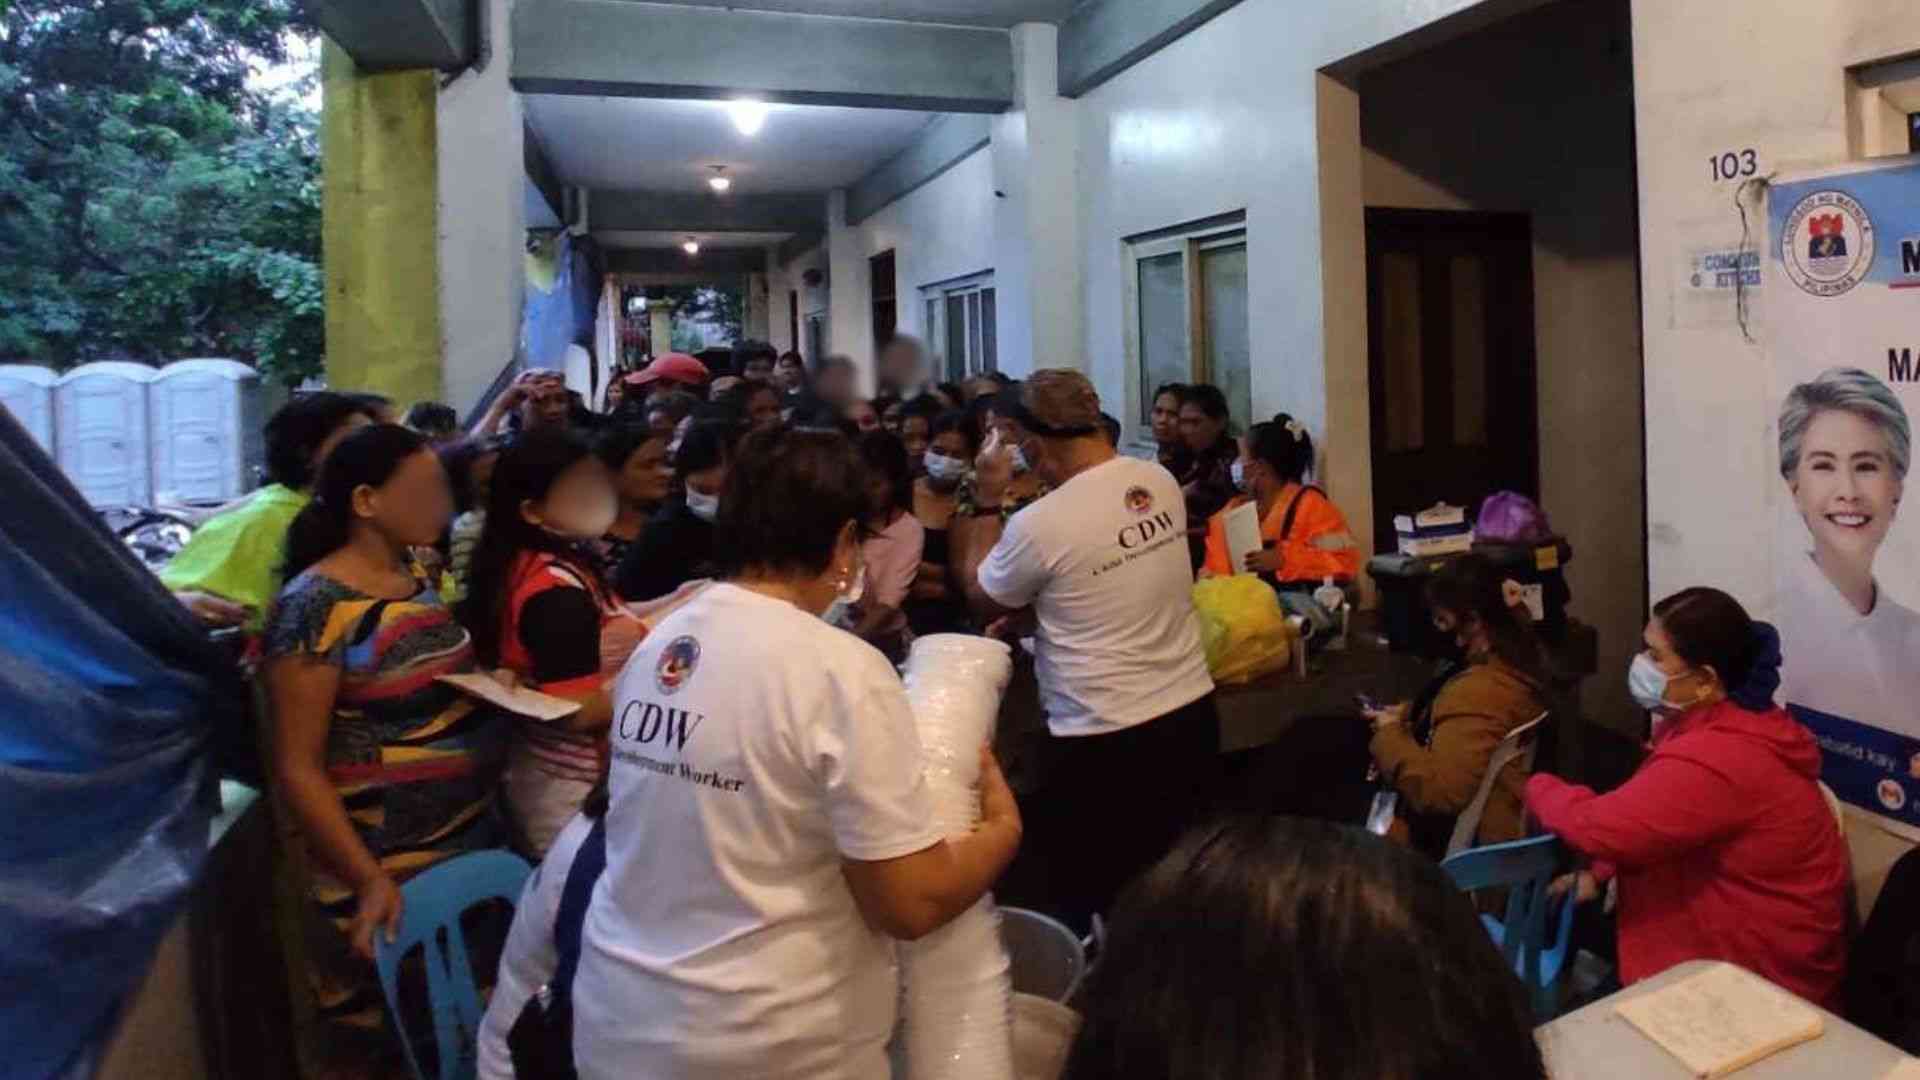 Manila LGU to give financial aid to affected families due to habagat